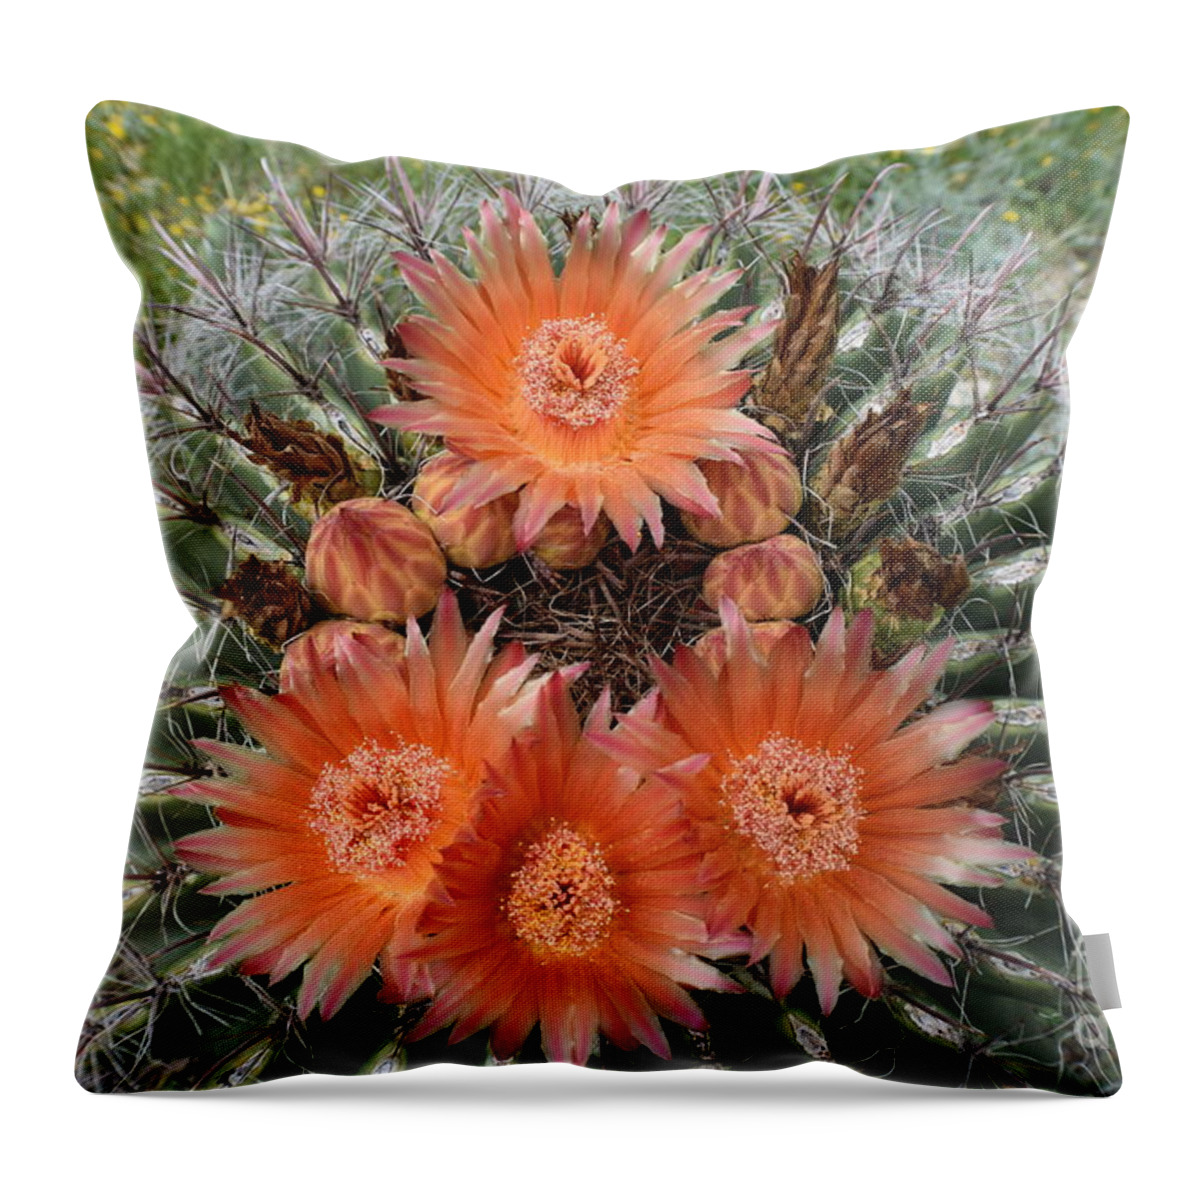 Arizona Throw Pillow featuring the photograph Beauty Among The Thorns by Janet Marie